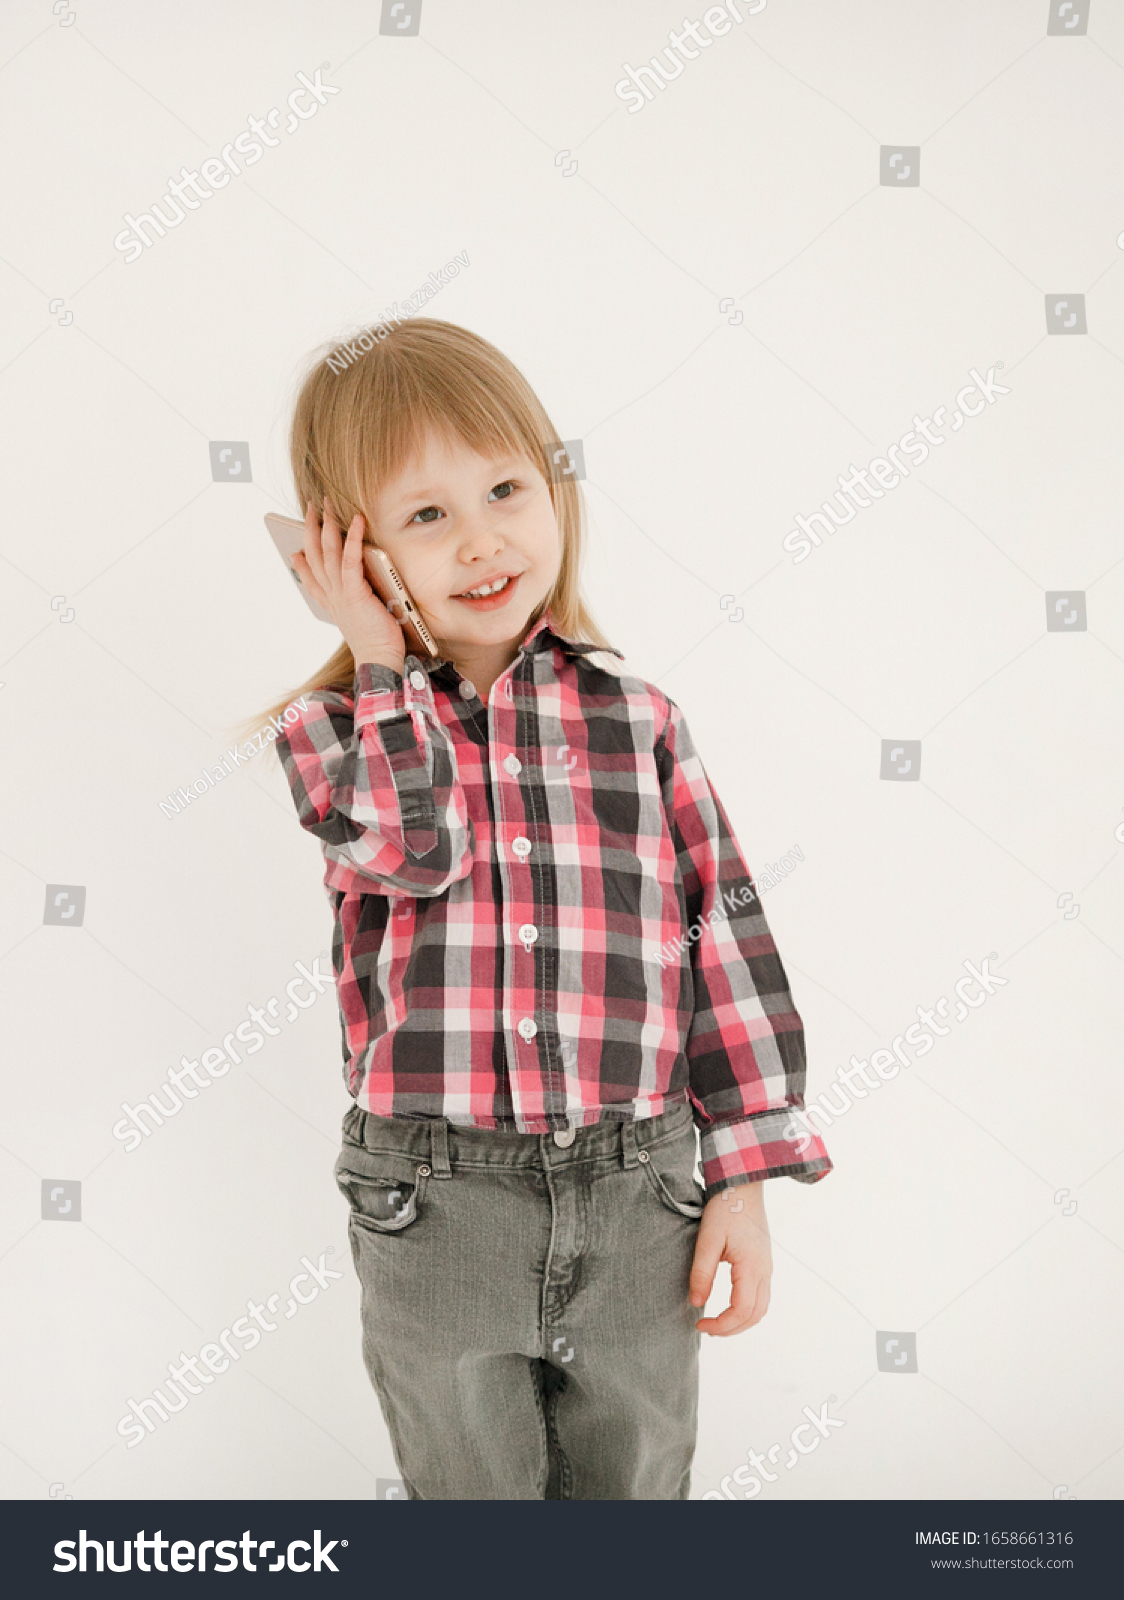 Emotional portrait of a cheerful and cheerful beautiful little girl looking with a smile in the mirror while using a smartphone with her grandmother, isolated on white background.Happy childhood #1658661316